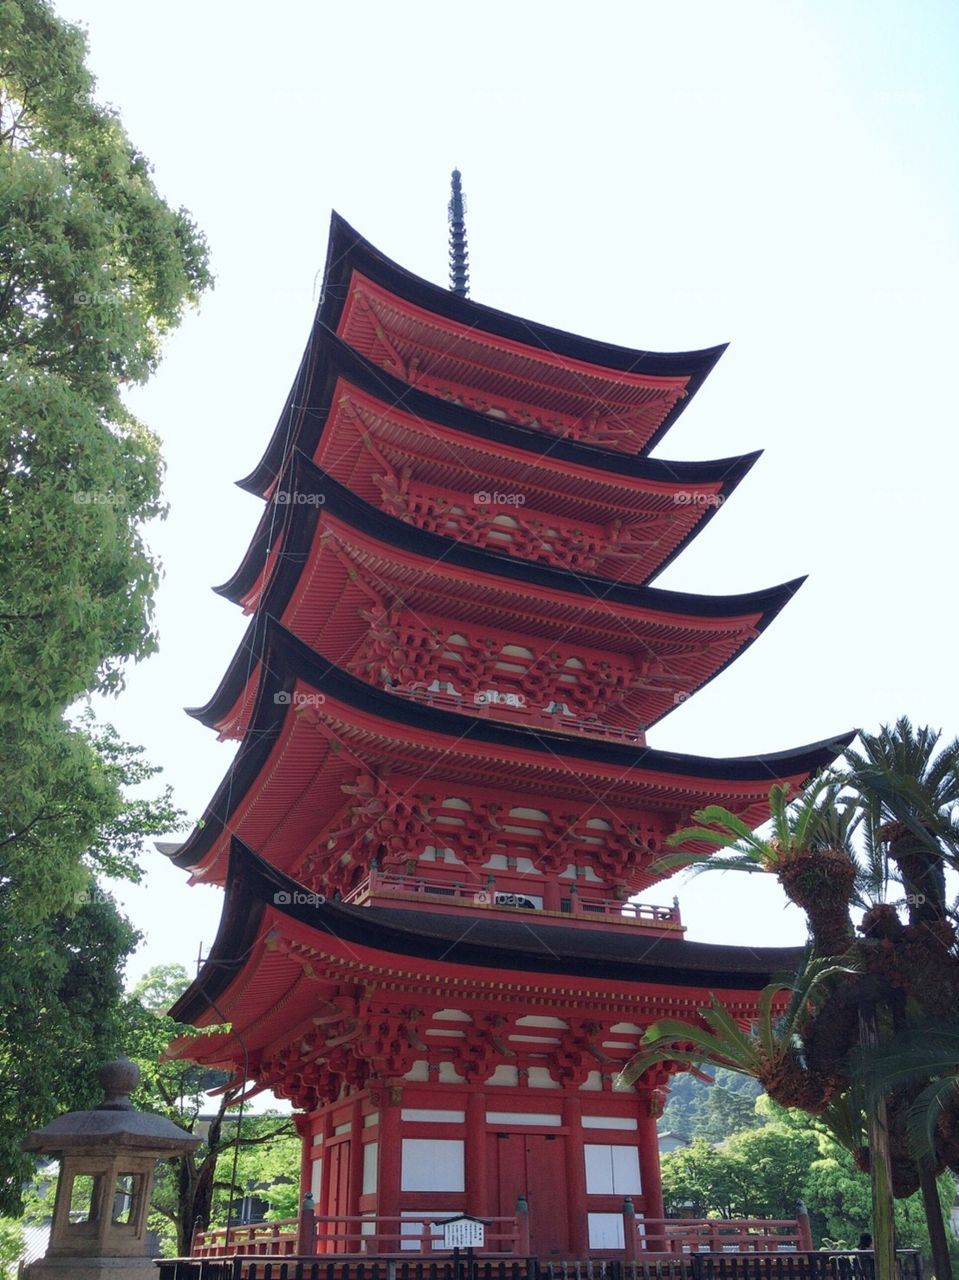 The Five-storied Pagoda was originally constructed in 1407, and it was restored in 1533. The main deity enshrined here is the Buddha of Medicine, accompanied by the Buddhist saints Fugen and Monju.